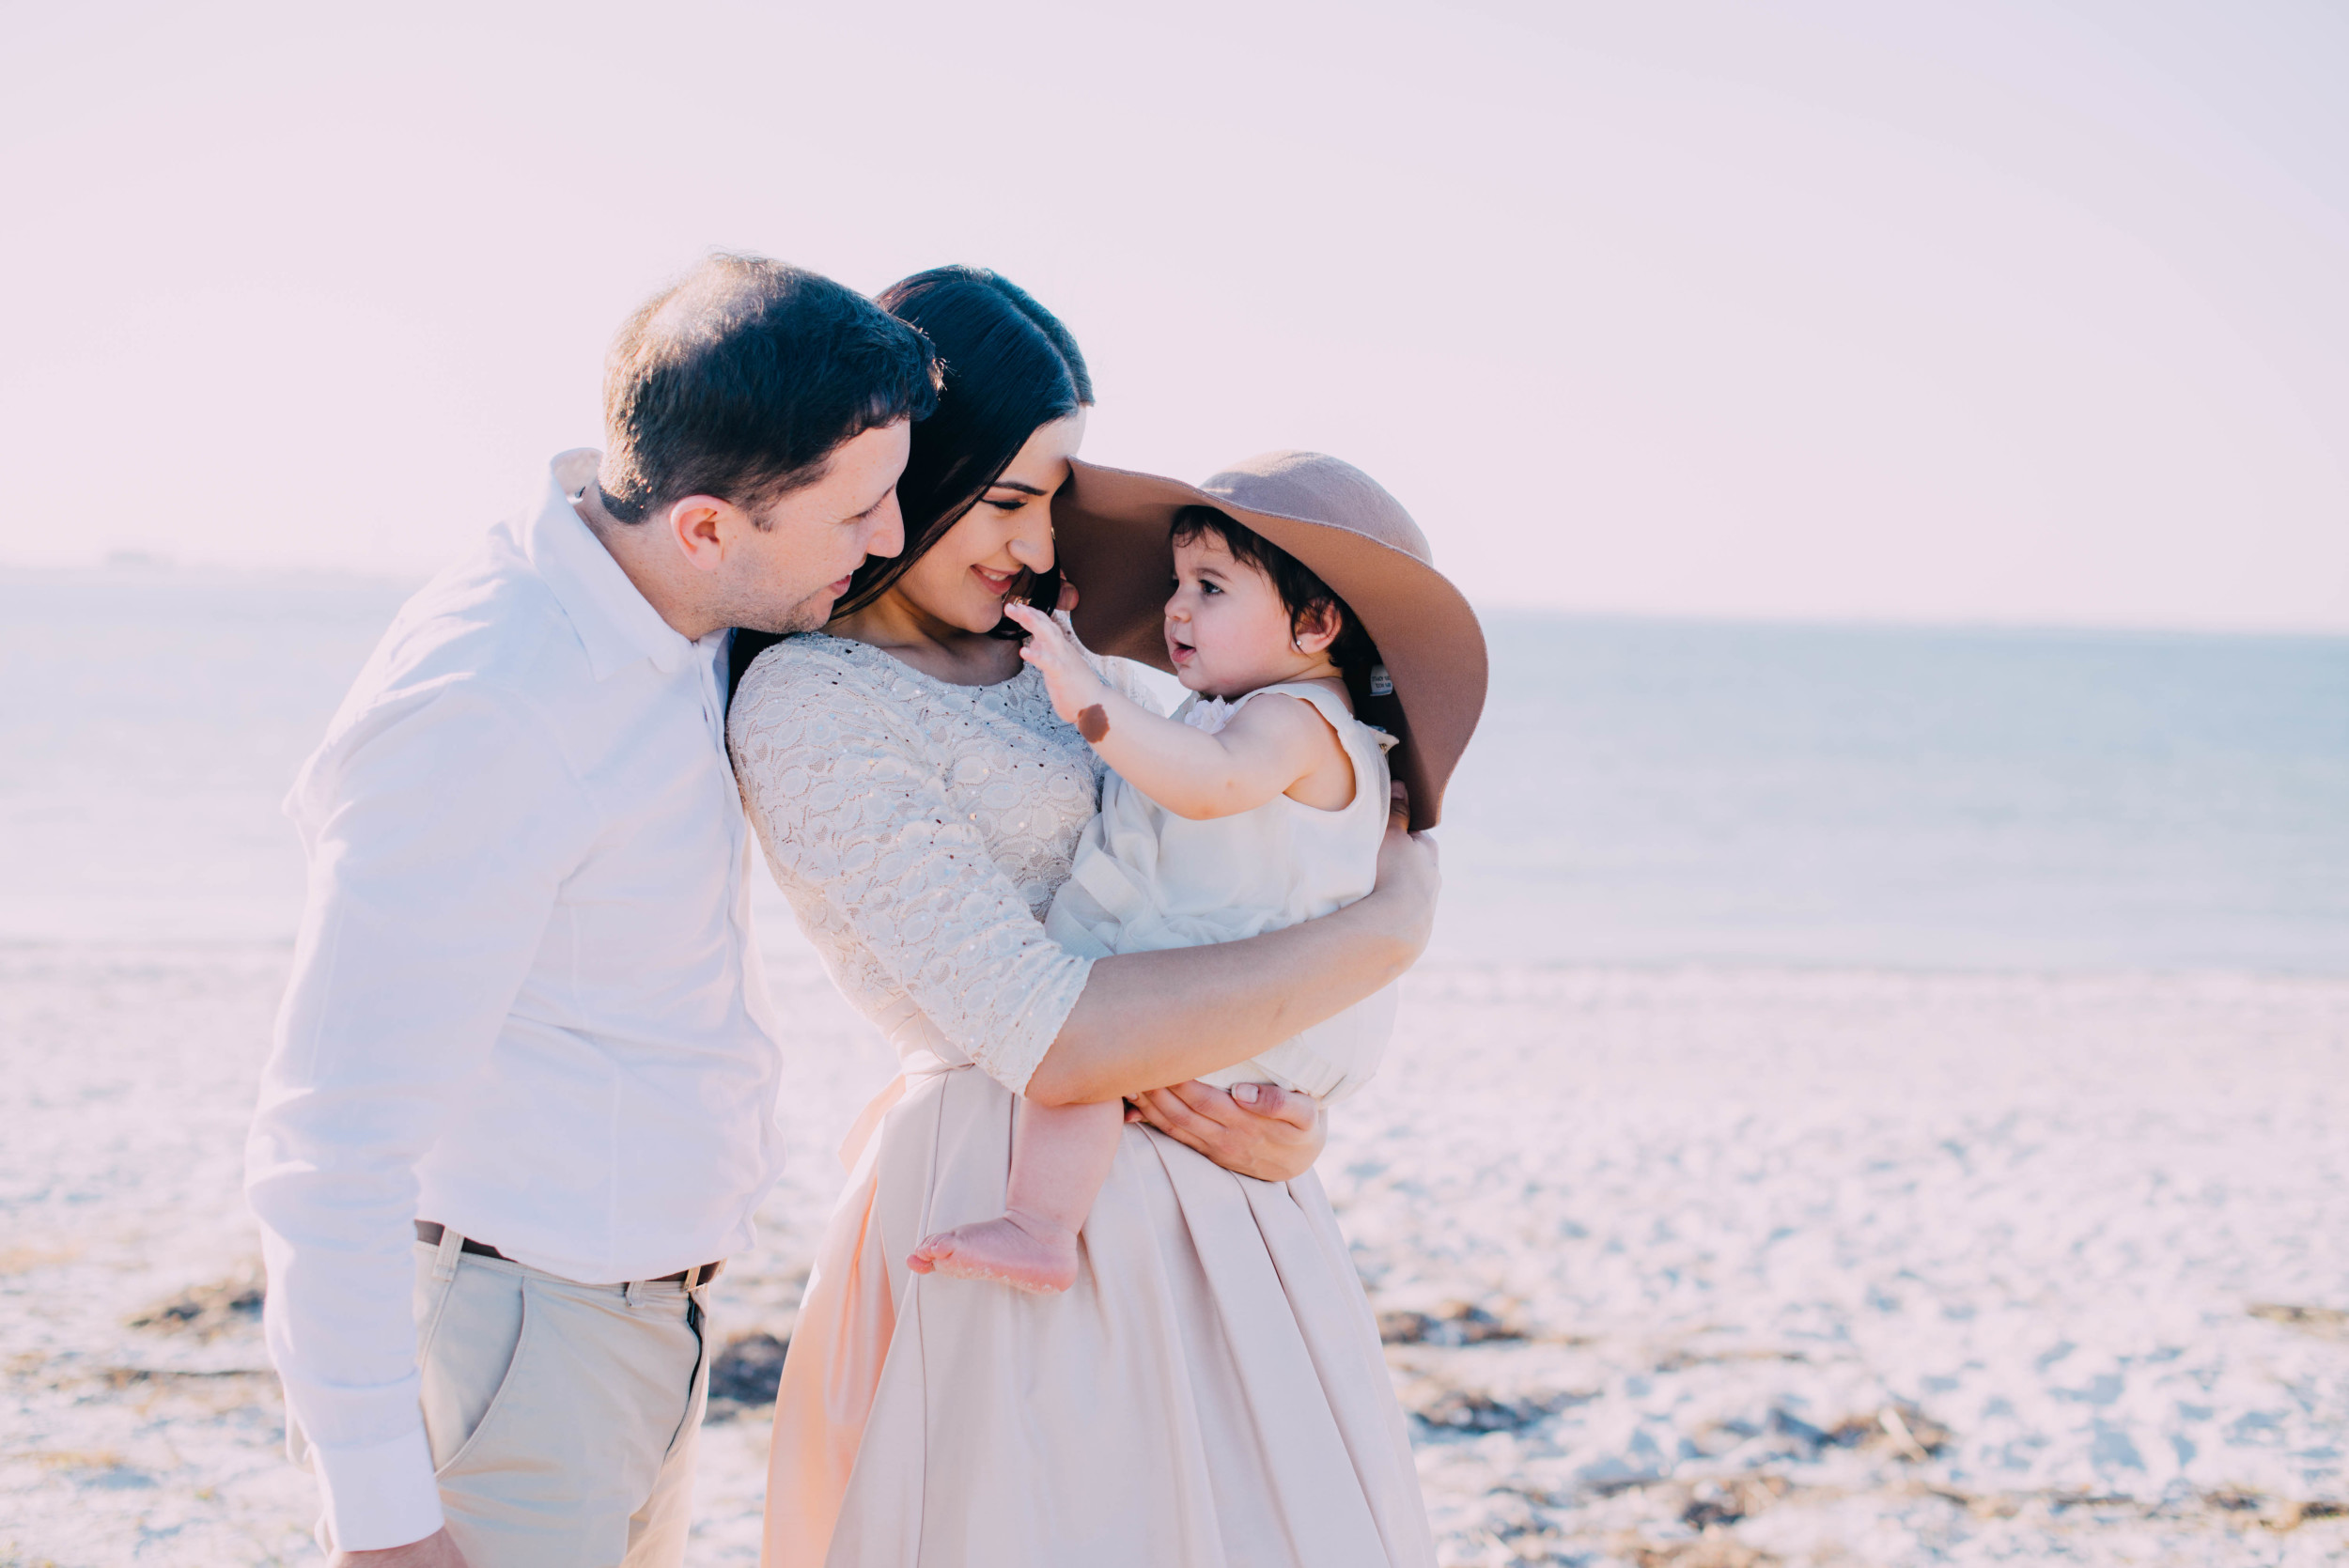 Engagement Photography - Family Photography - Tampa Bay Photographer